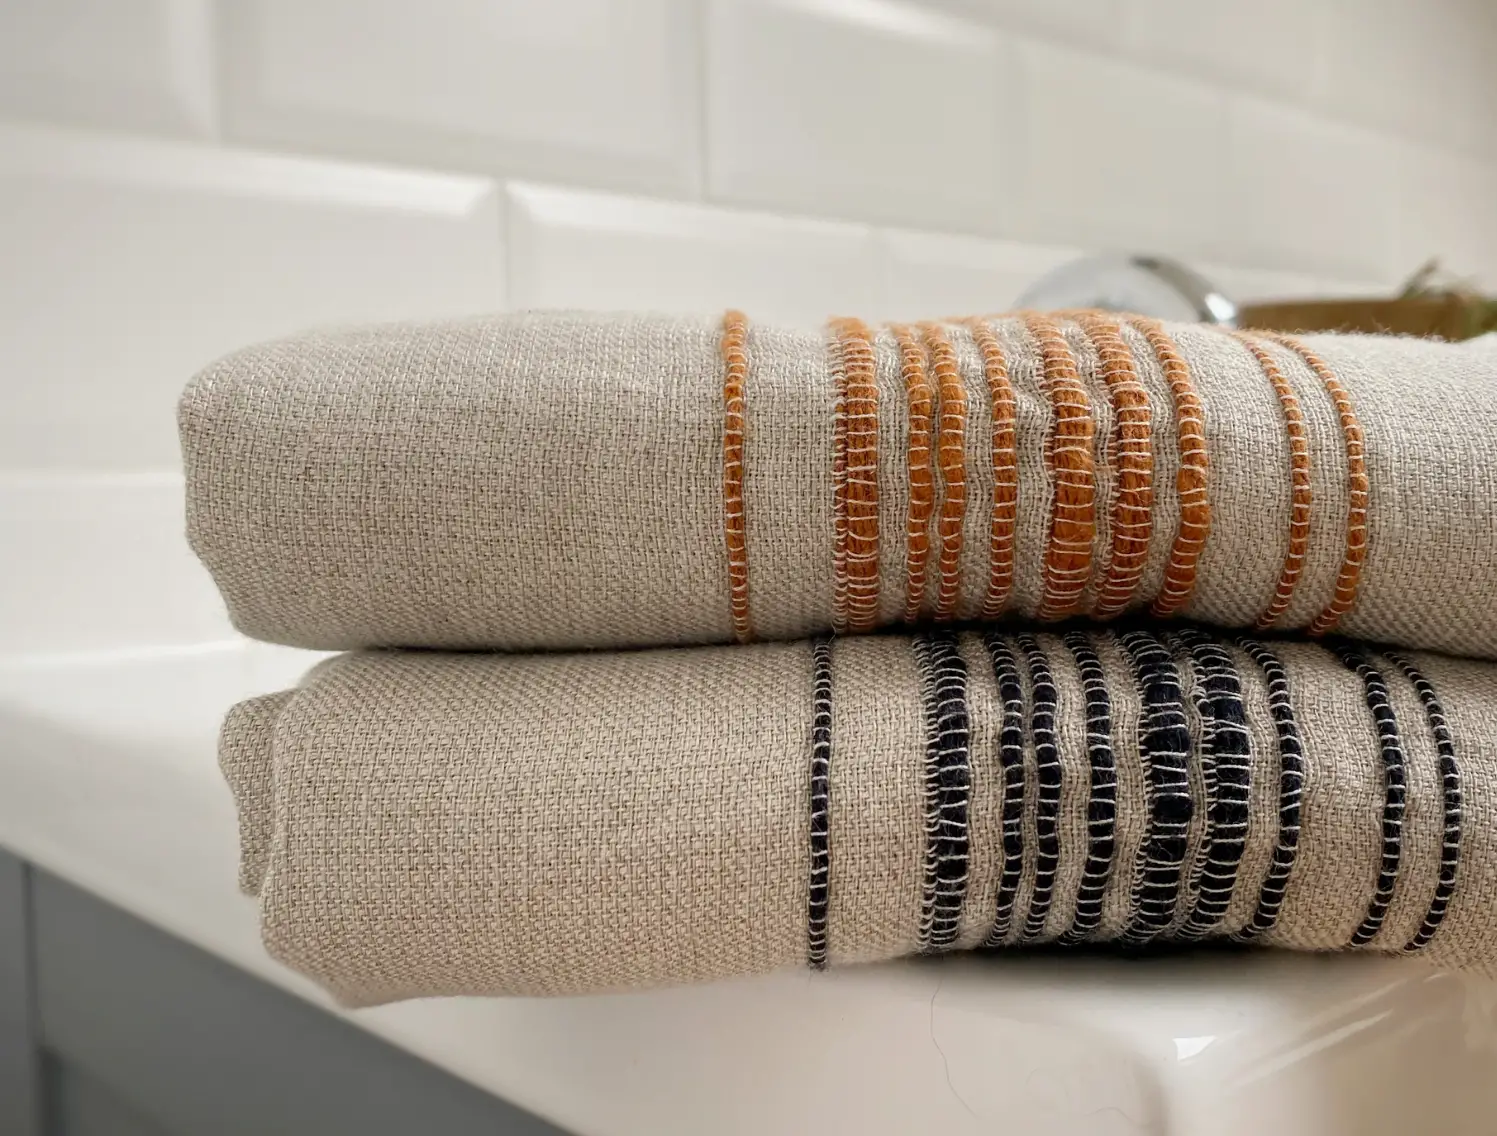 https://www.greenerlyfe.com/wp-content/uploads/2022/06/pros-and-cons-of-turkish-towels-1-e1656355304376.png